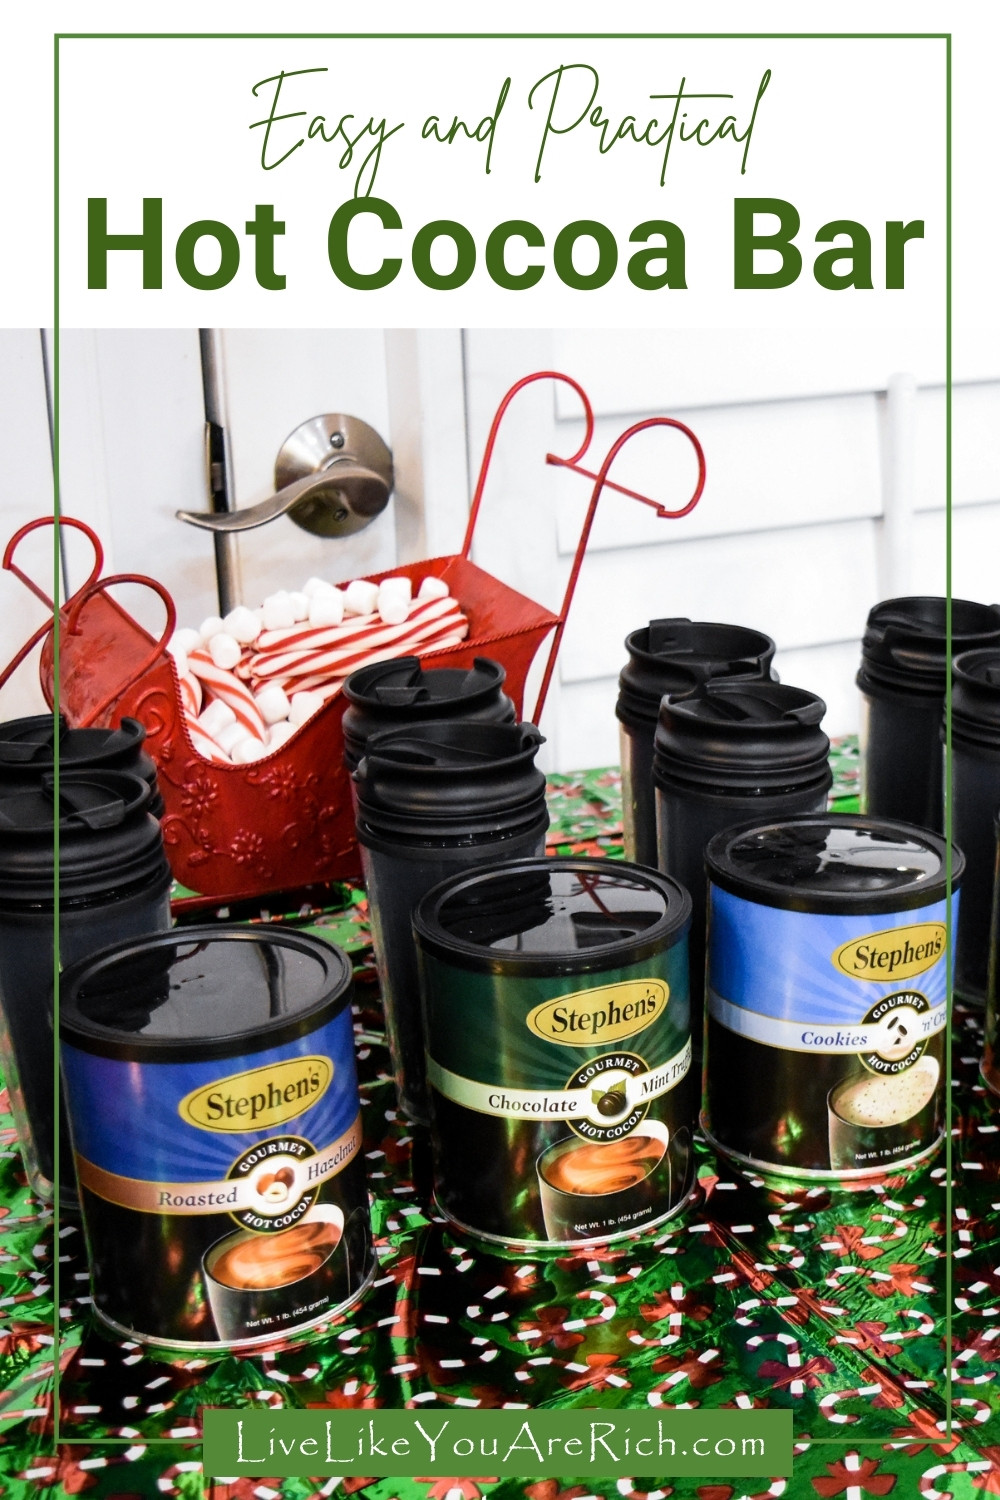 Easy and Practical Hot Cocoa Bar